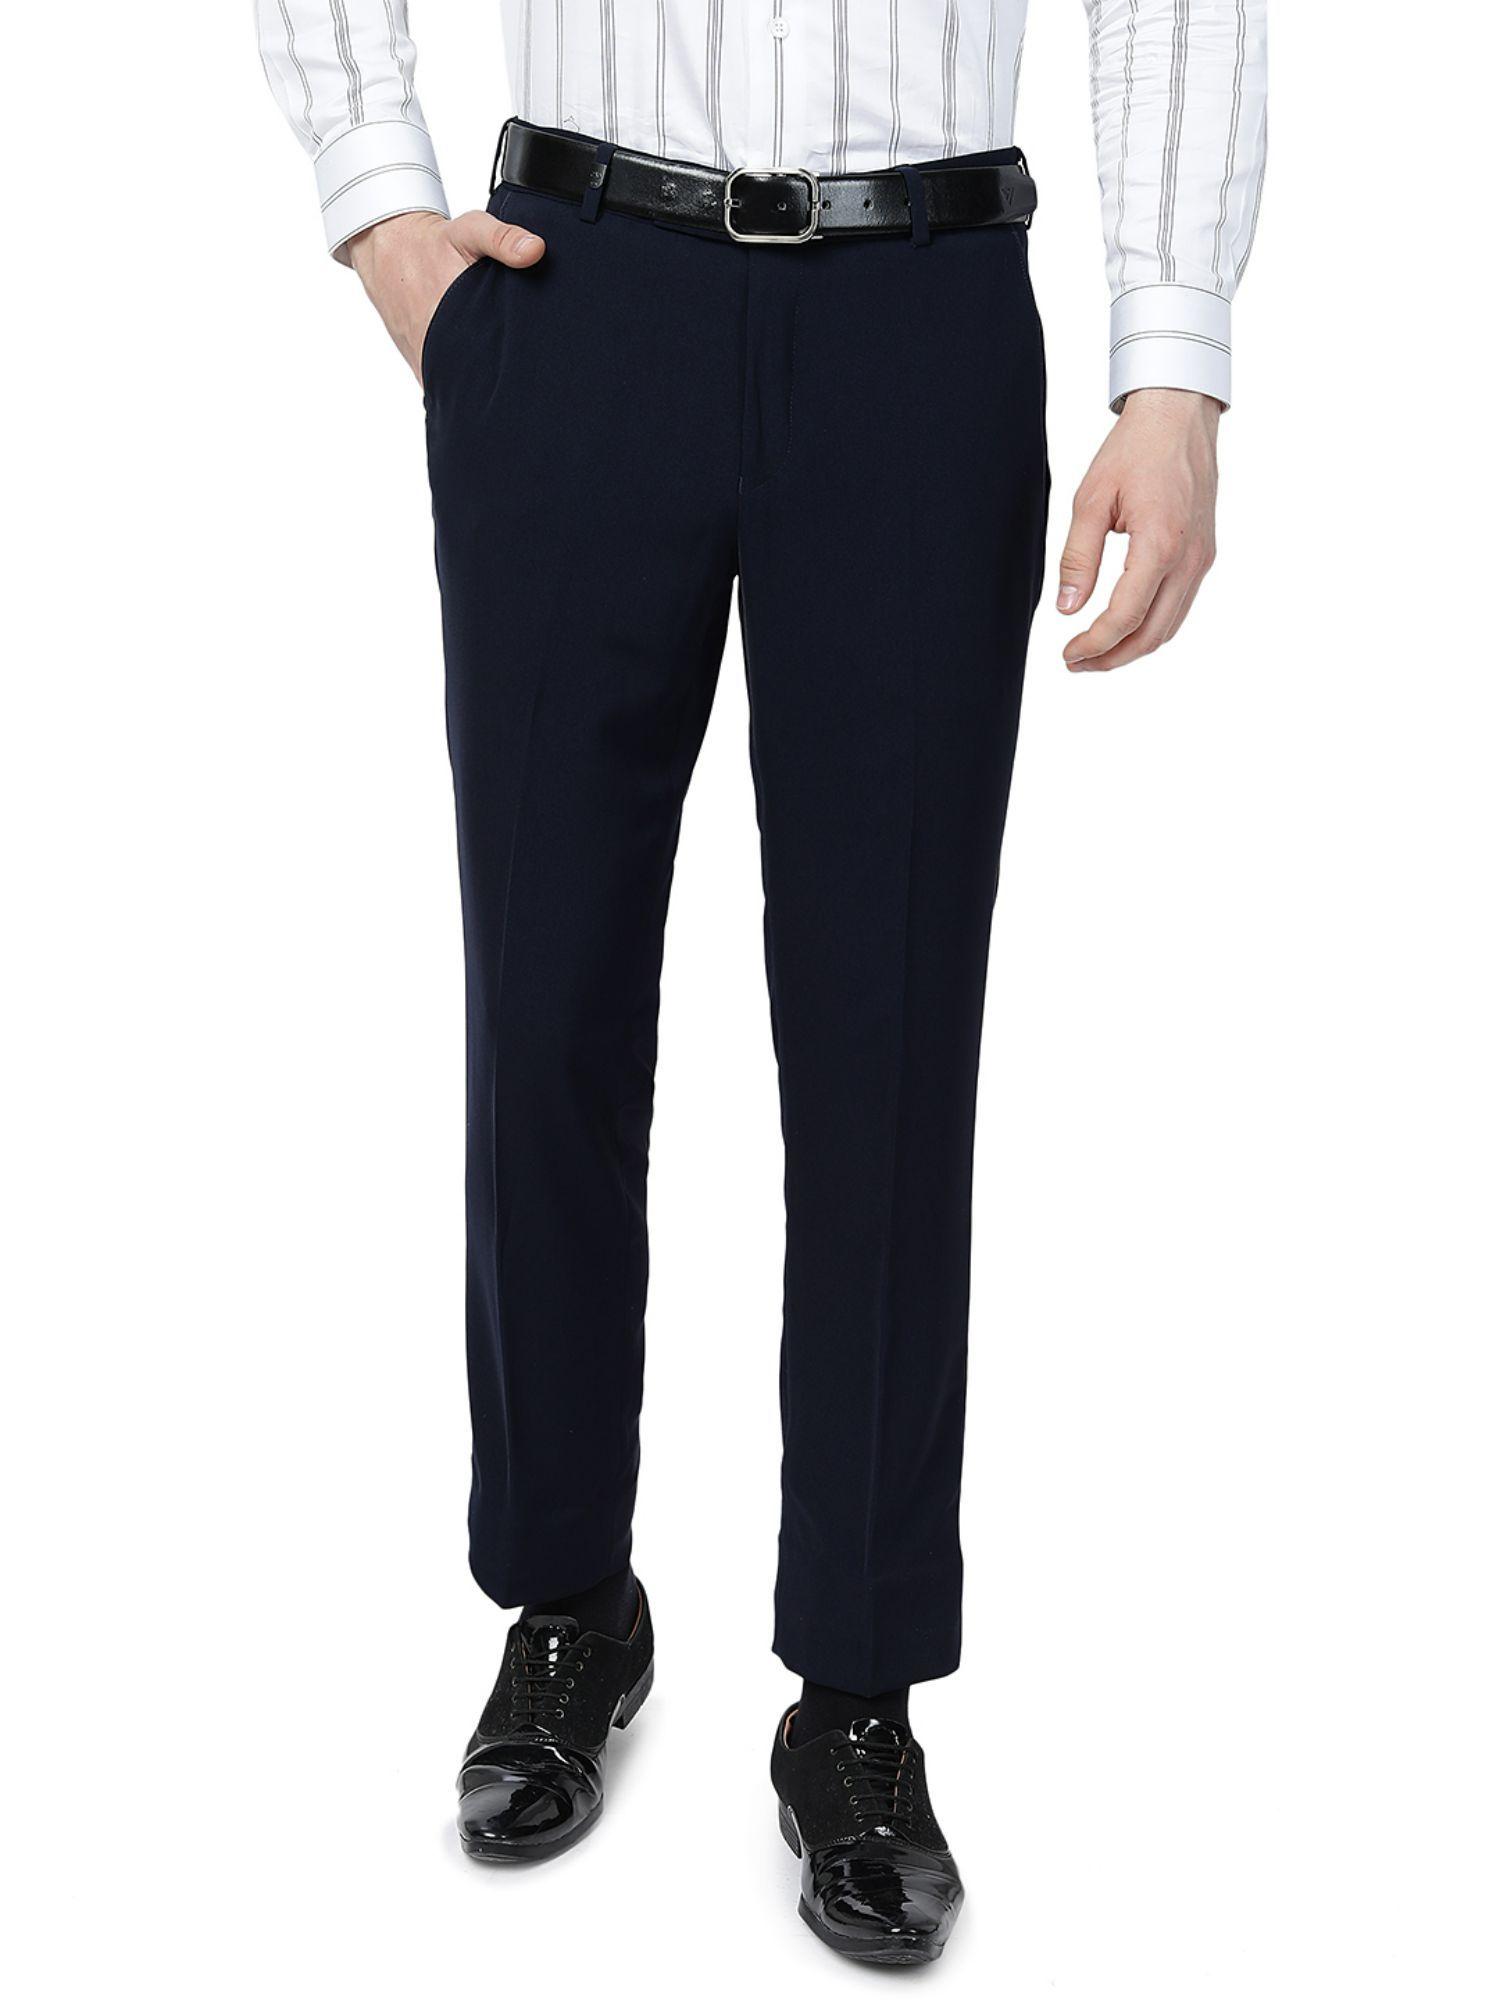 s men's navy blue terry rayon slim fit solid formal trouser